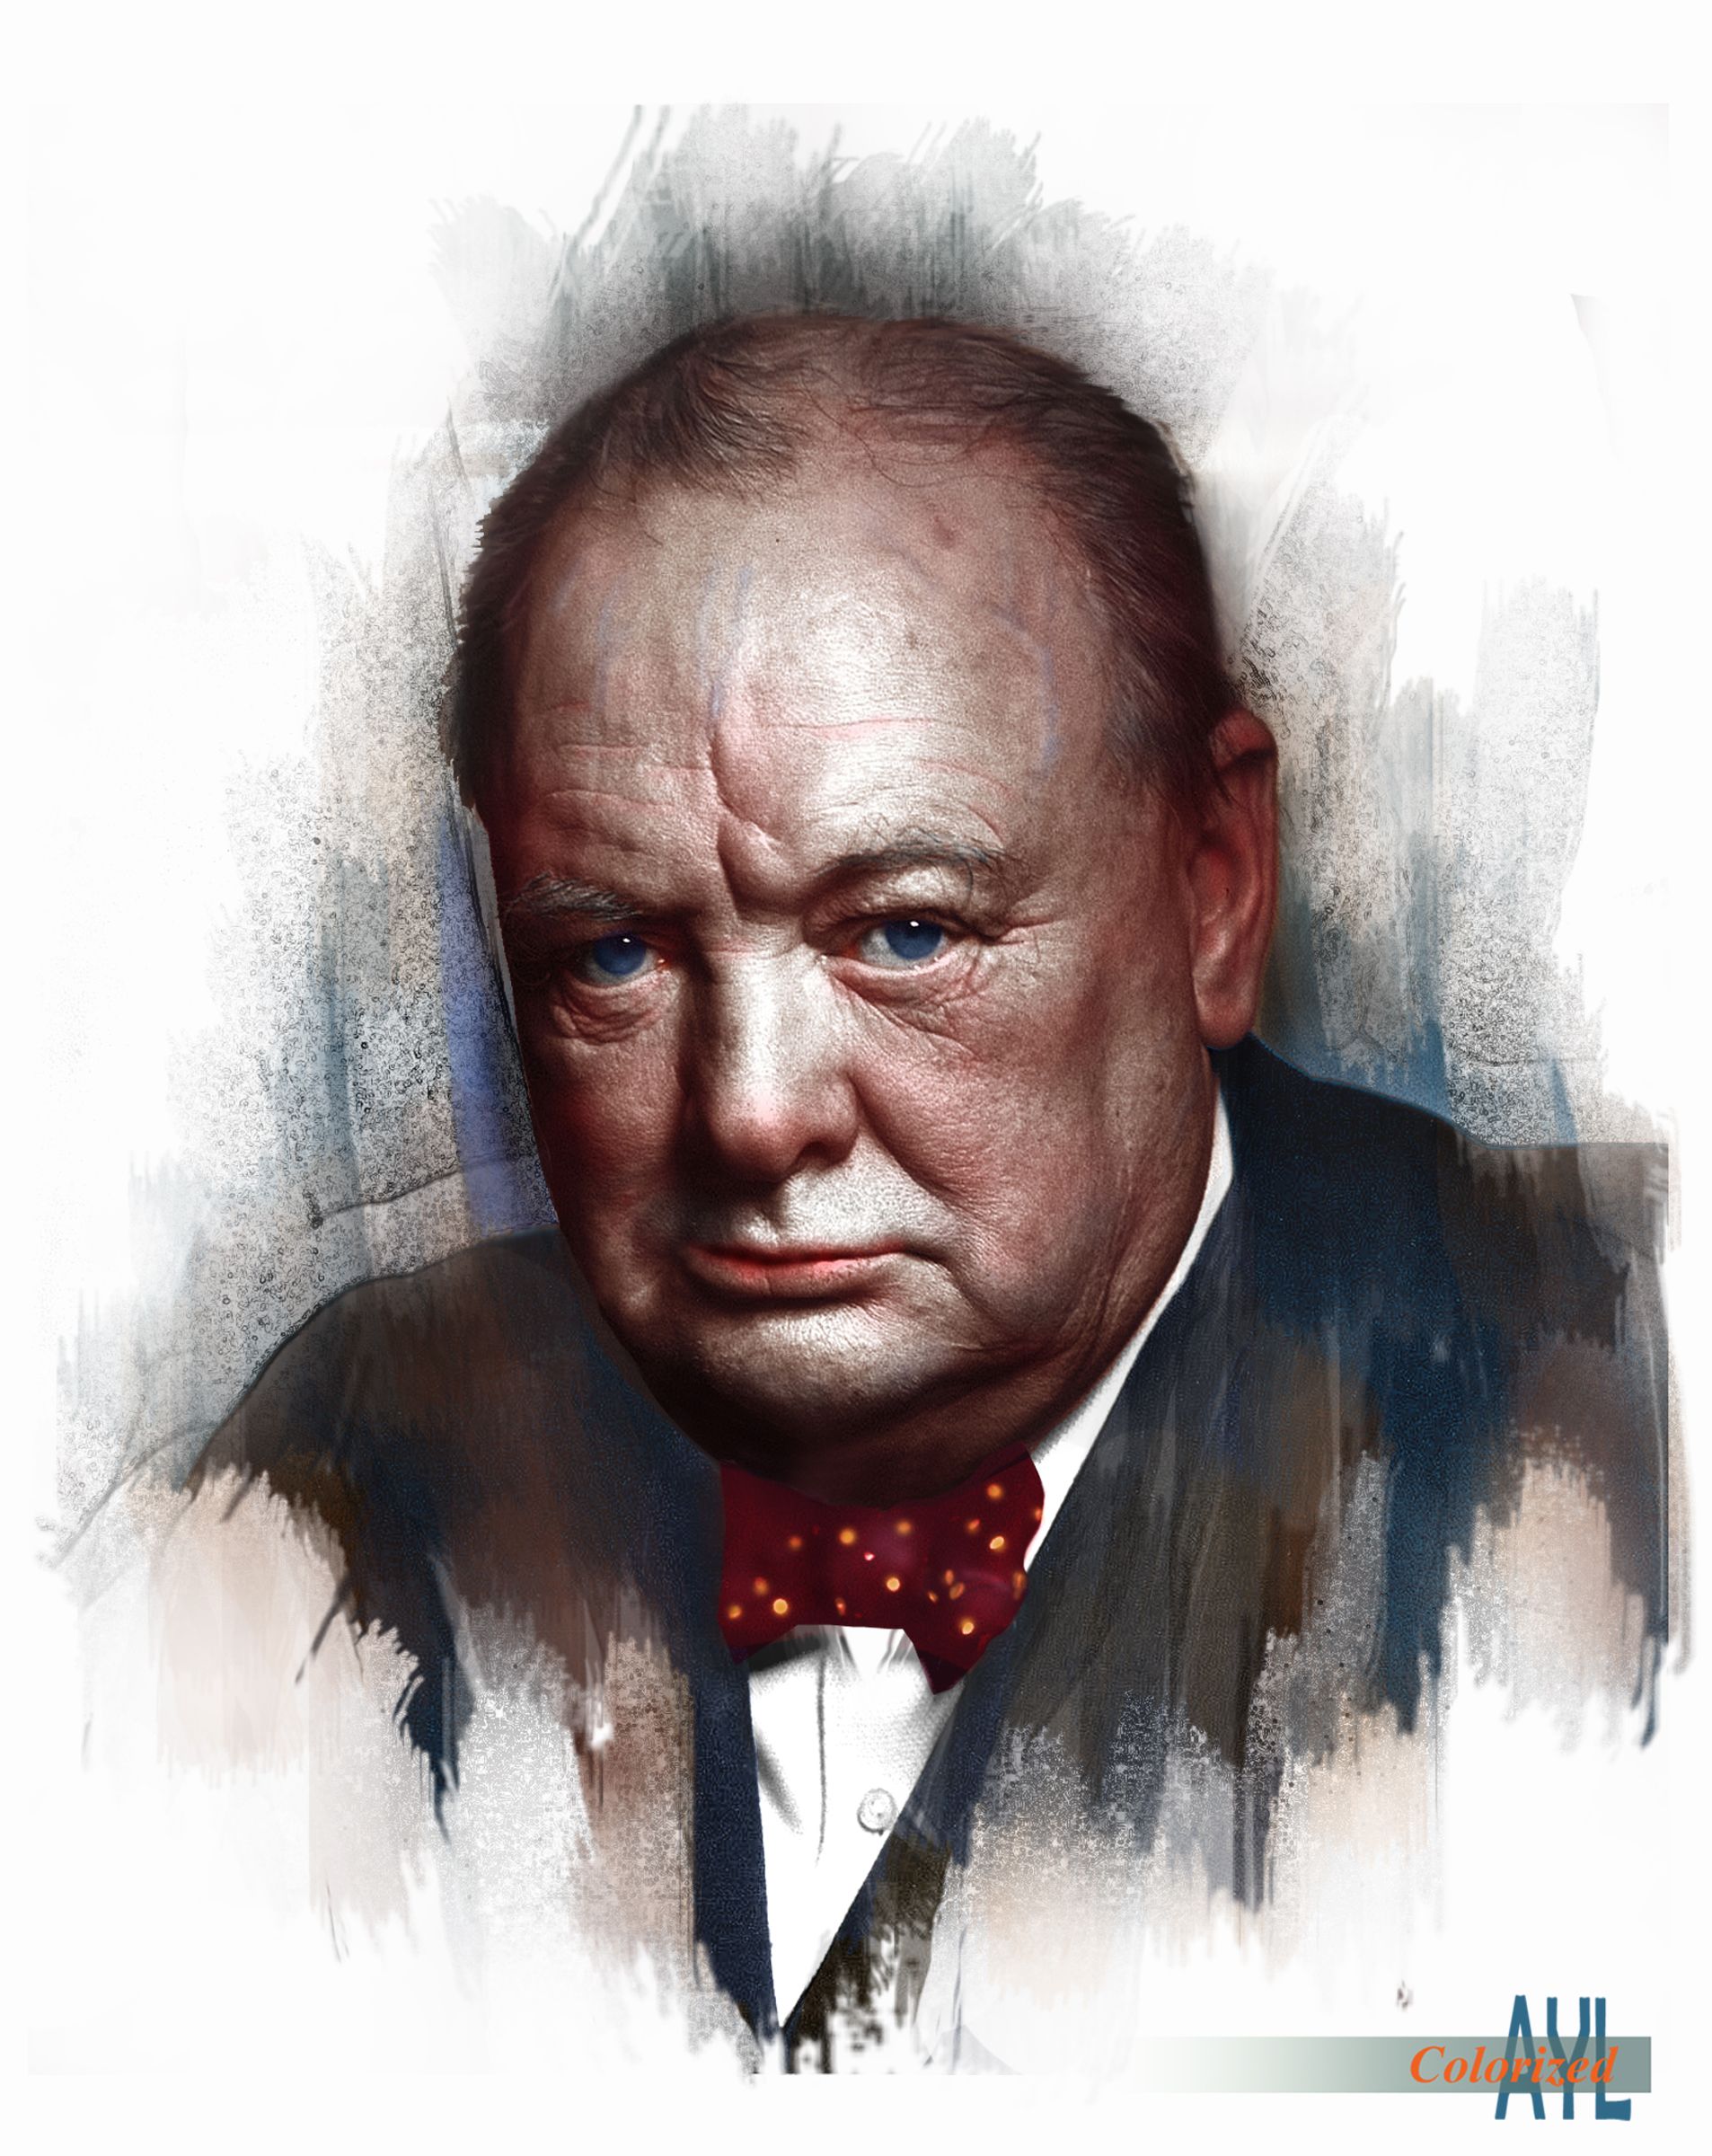 Sir Winston Churchill (1874 1965), Colorized And Stylized By Alex Y. Lim From A 1941 Photo. Winston Churchill Photo, Winston Churchill, Winston Churchill Quotes